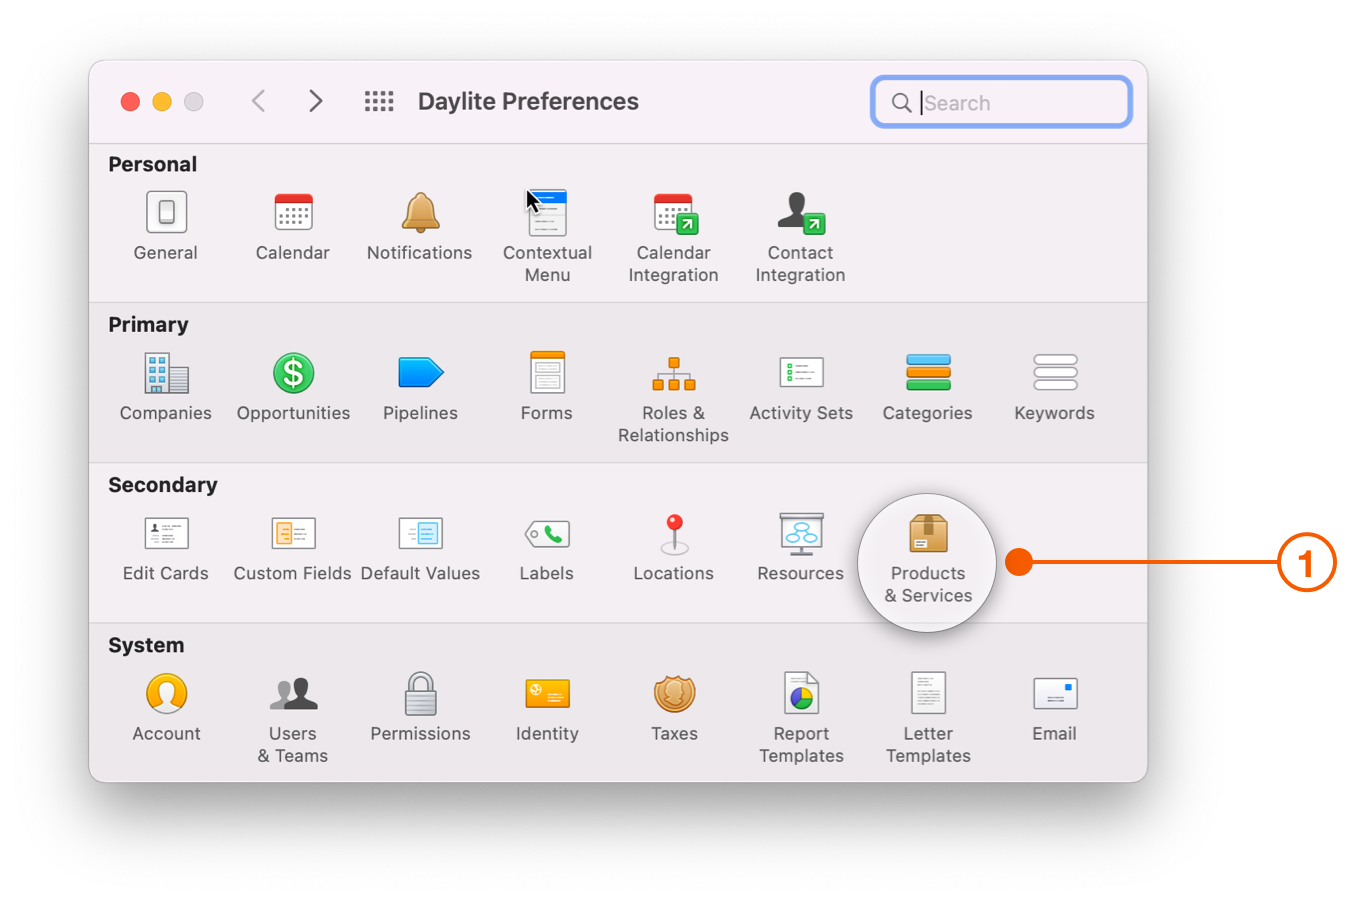 Daylite Preferences screen selecting Products and Services